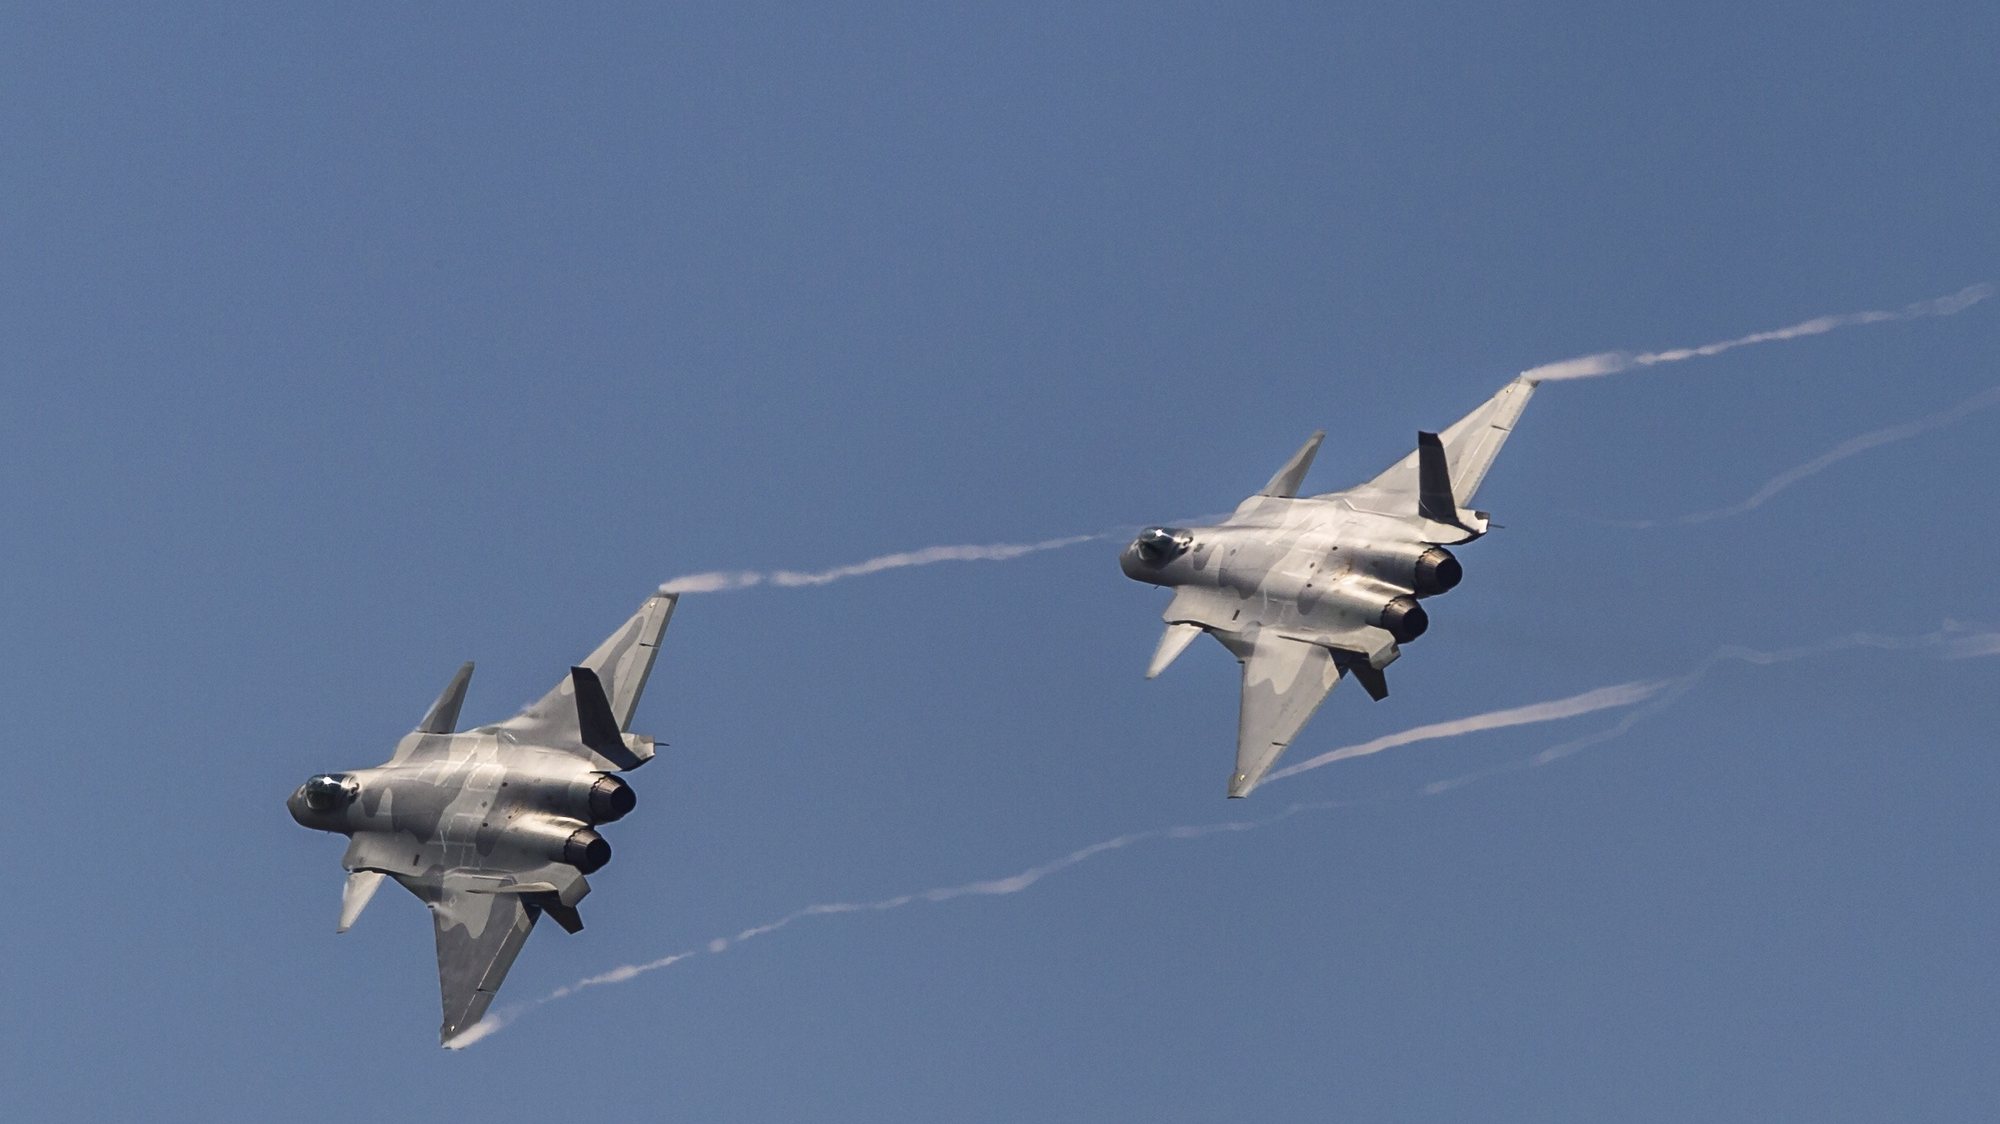 epa07144126 Two Chinese J-20 &#039;Chengdu&#039; stealth fighter jets perform during a flying display on the first day of a military airshow in Zhuhai, Guangzhou province, China, 06 November 2018. The China International Aviation and Aerospace Exhibition, China&#039;s largest international aerospace trade show, runs until 11 November 2018.  EPA/ALEKSANDAR PLAVEVSKI